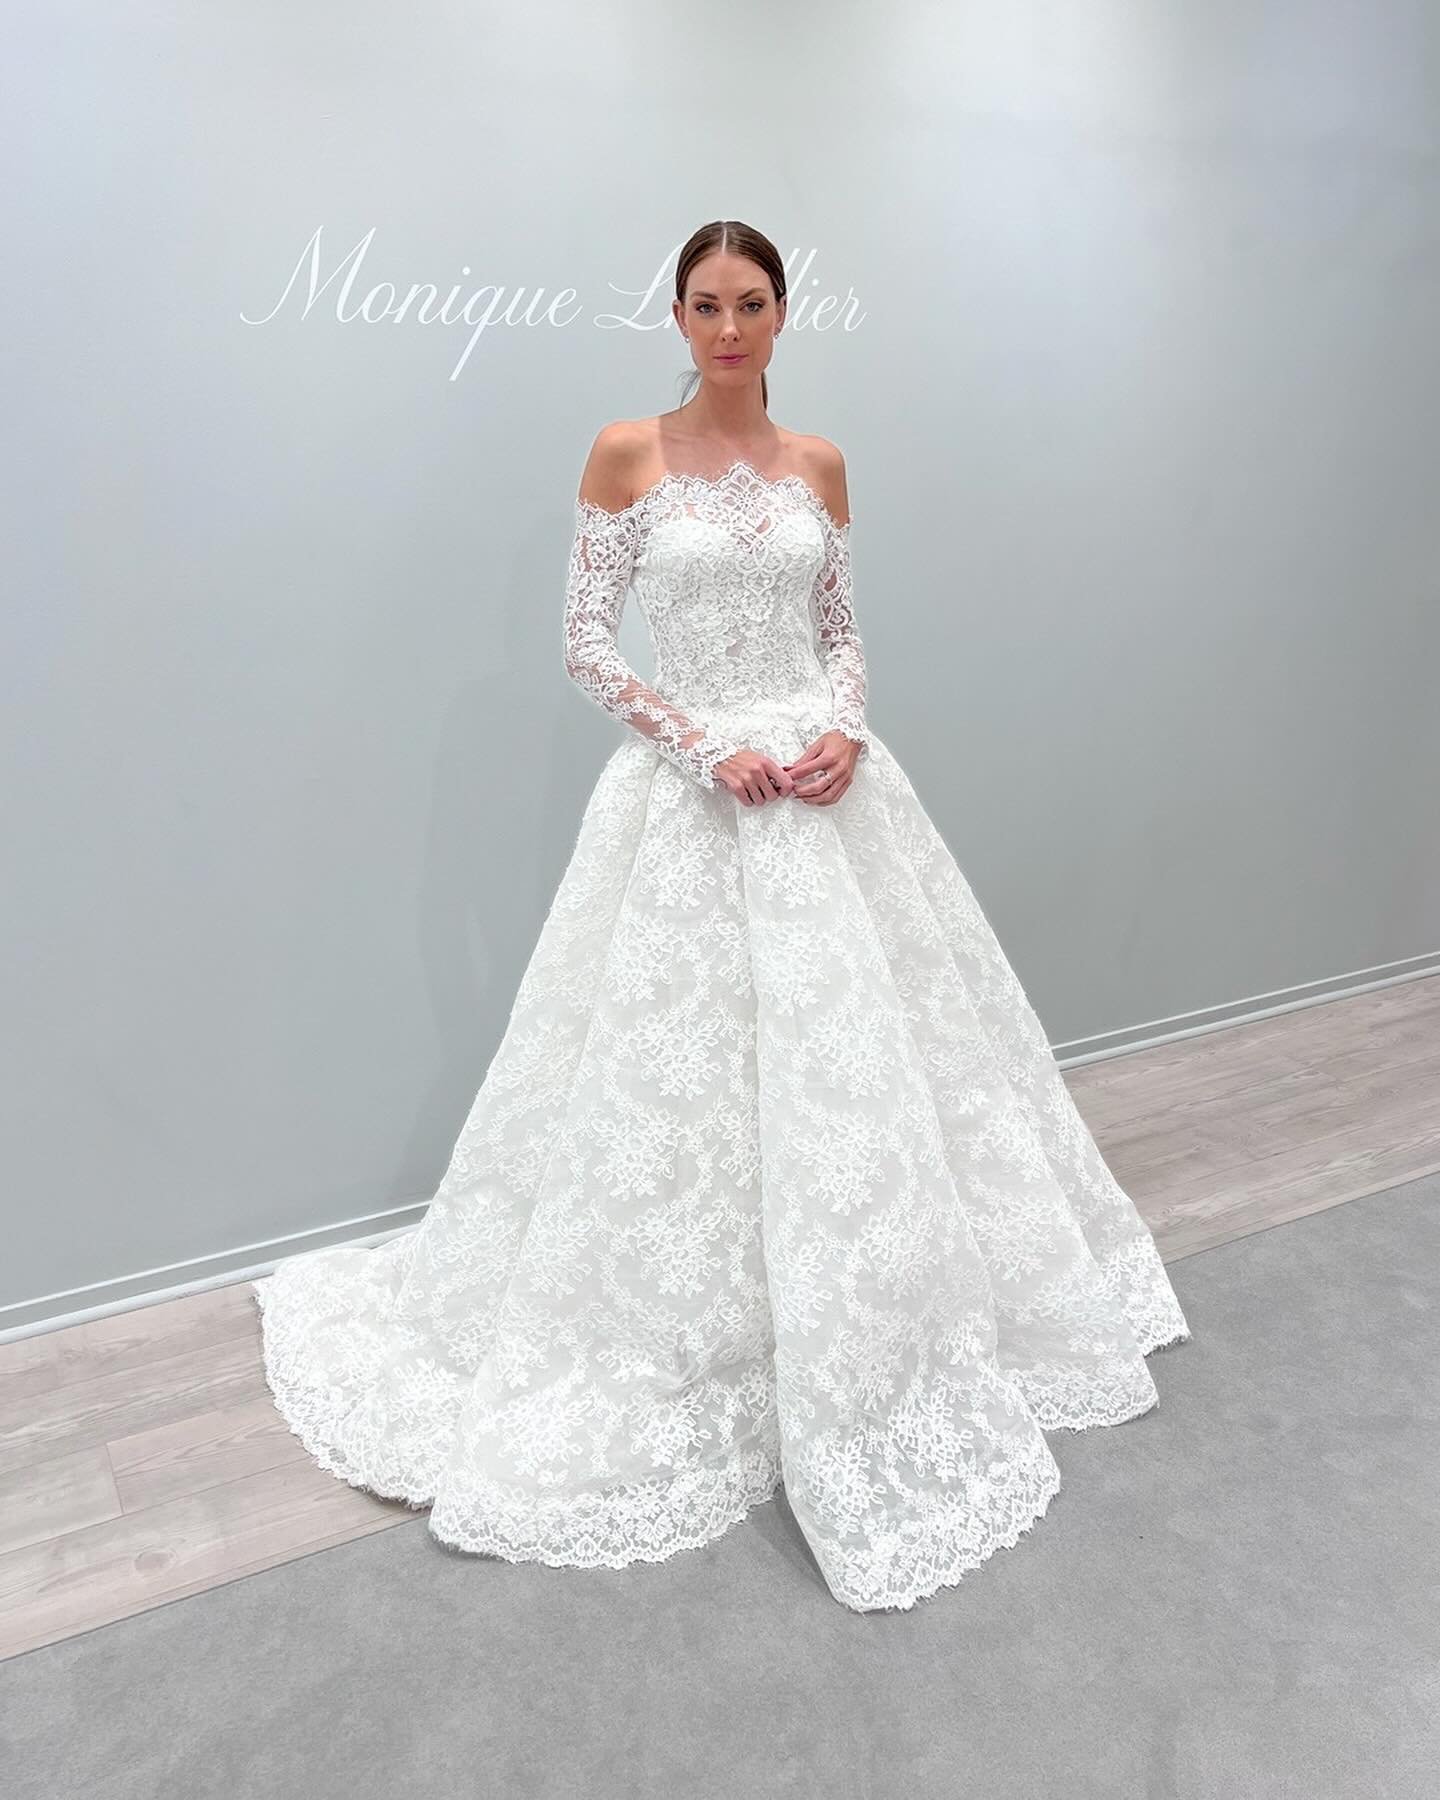 Step into timeless elegance bursting with romantic detailing and luxurious fabrics . ✨ Swipe to discover our top picks from the breathtaking Monique Lhuillier Spring 2025 bridal collection fresh off the runway!

~
~
~
~
~

#moniquelhuillier #moniquel